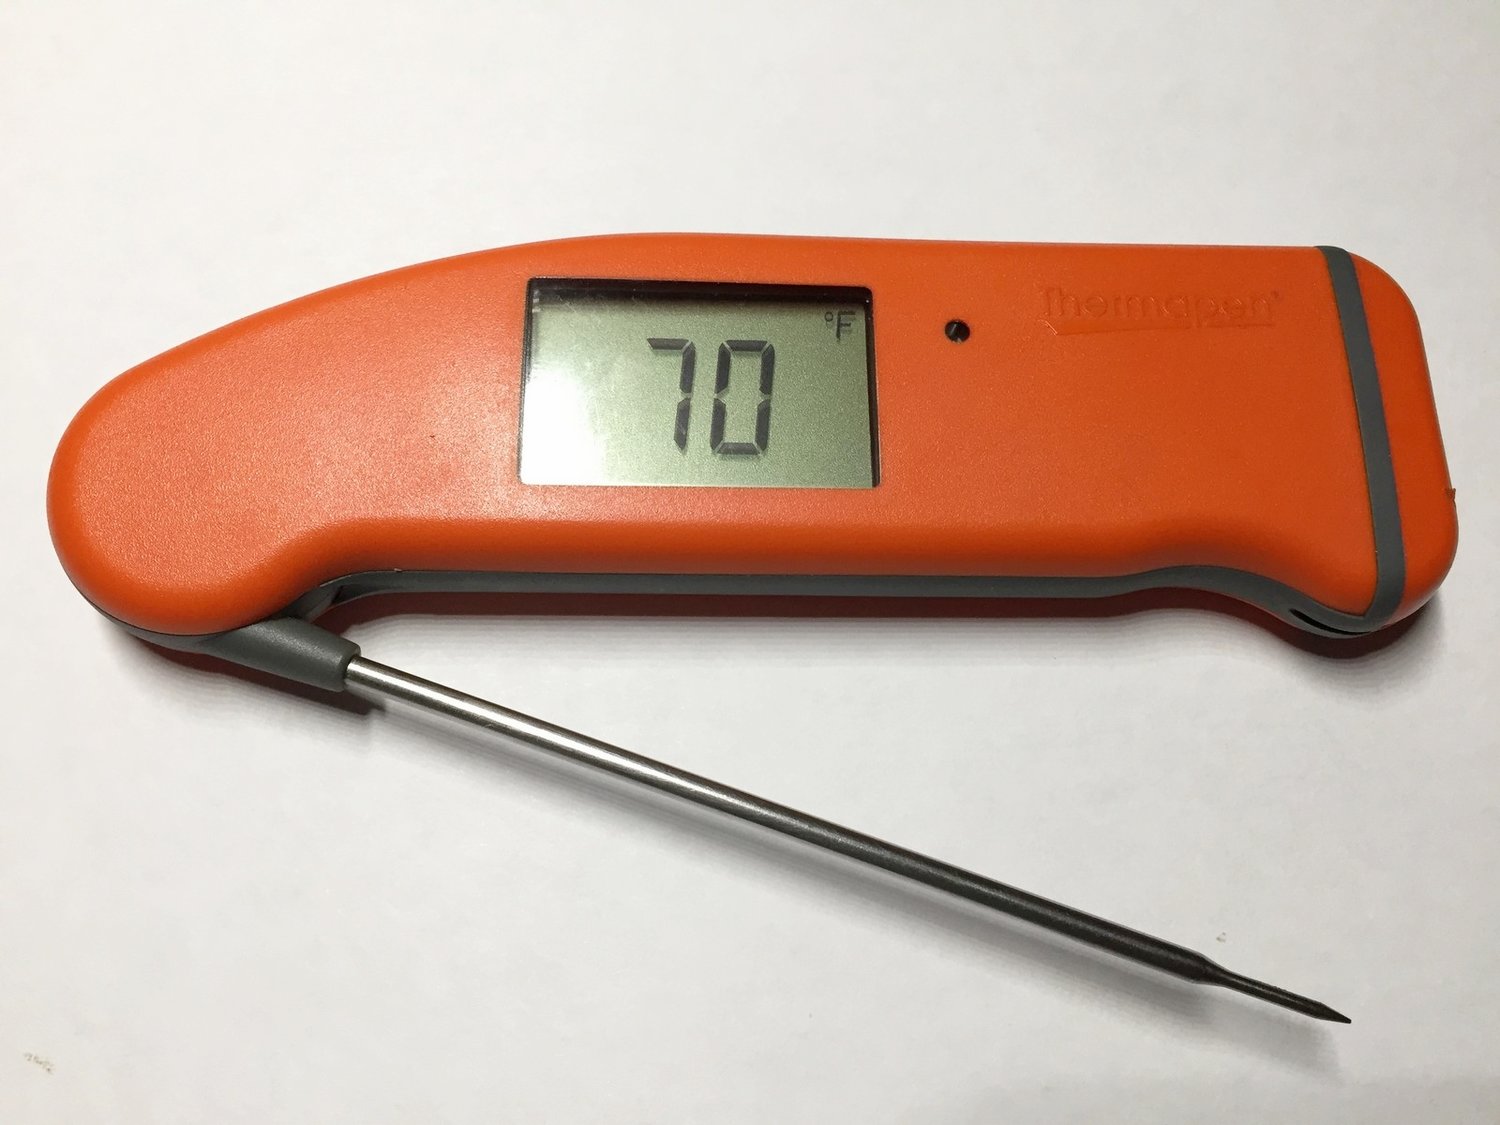 Thermoworks Water-Resistant Pocket Thermometer